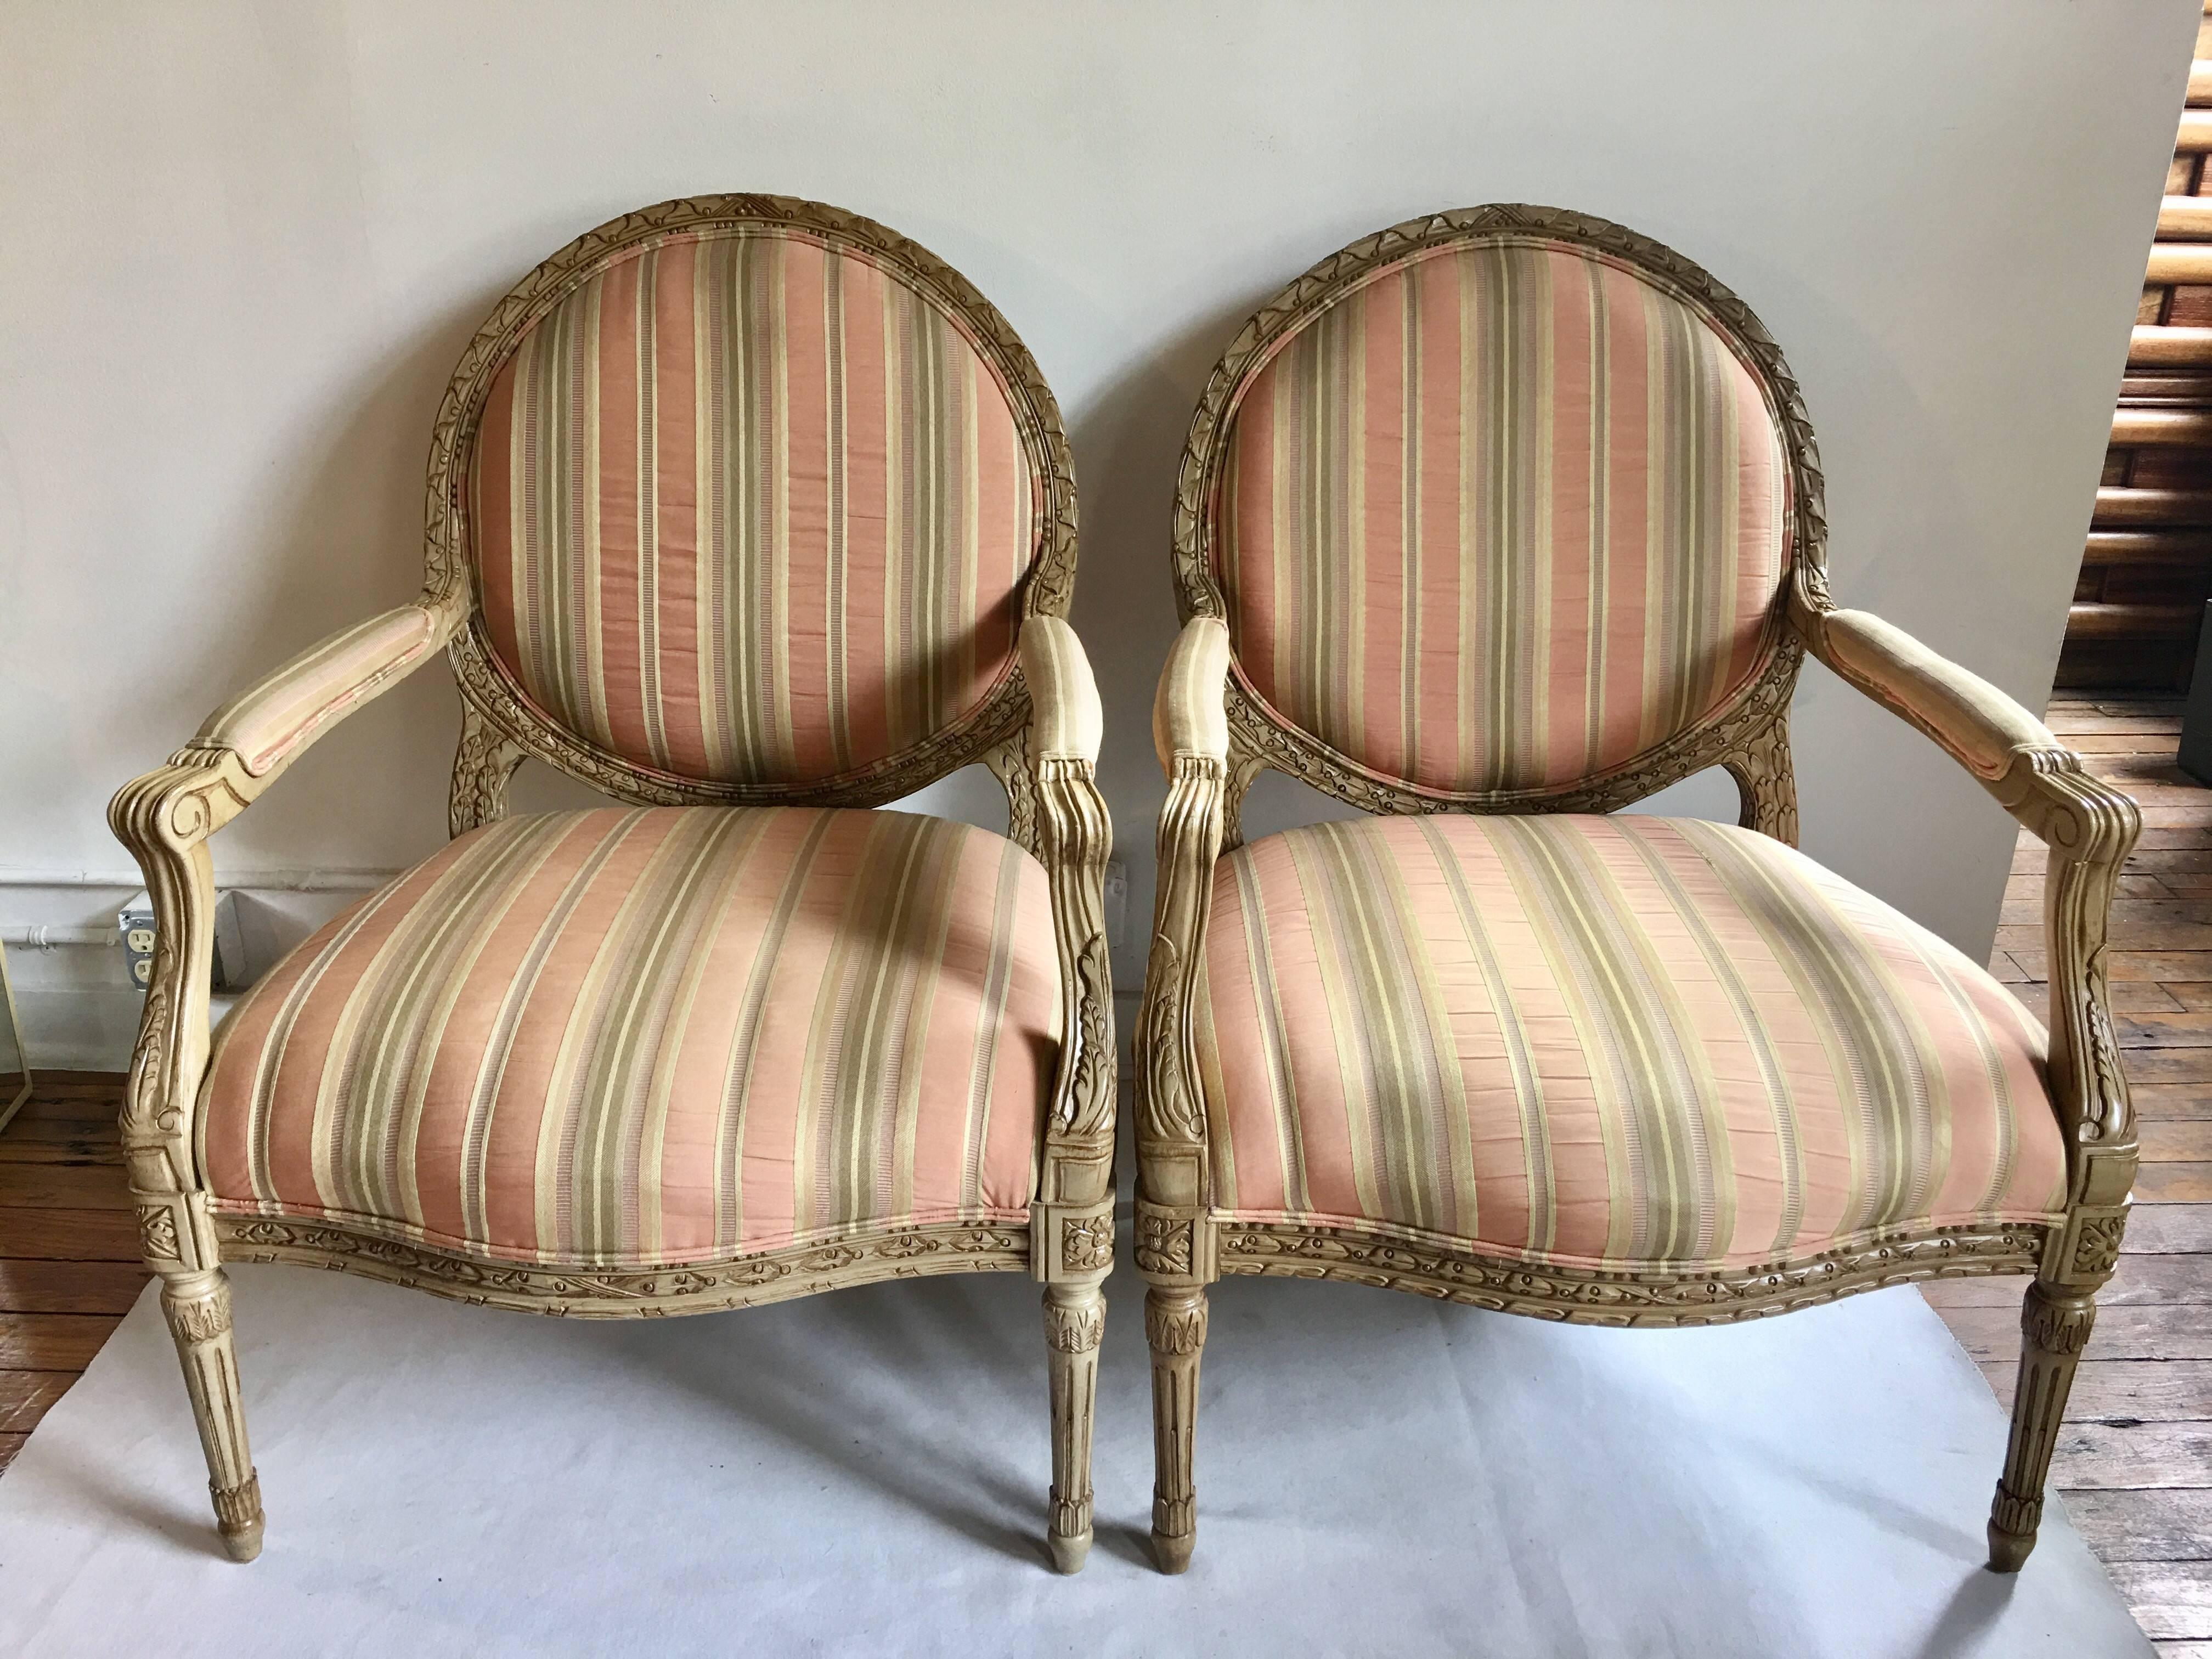 Pair of vintage French XVI style bergère armchairs by Henredon Fine Furniture. These generous sized accent chairs feature carved relief painted wood frames with a traditional round medallion shaped back and neoclassical style fluted legs. Chairs are